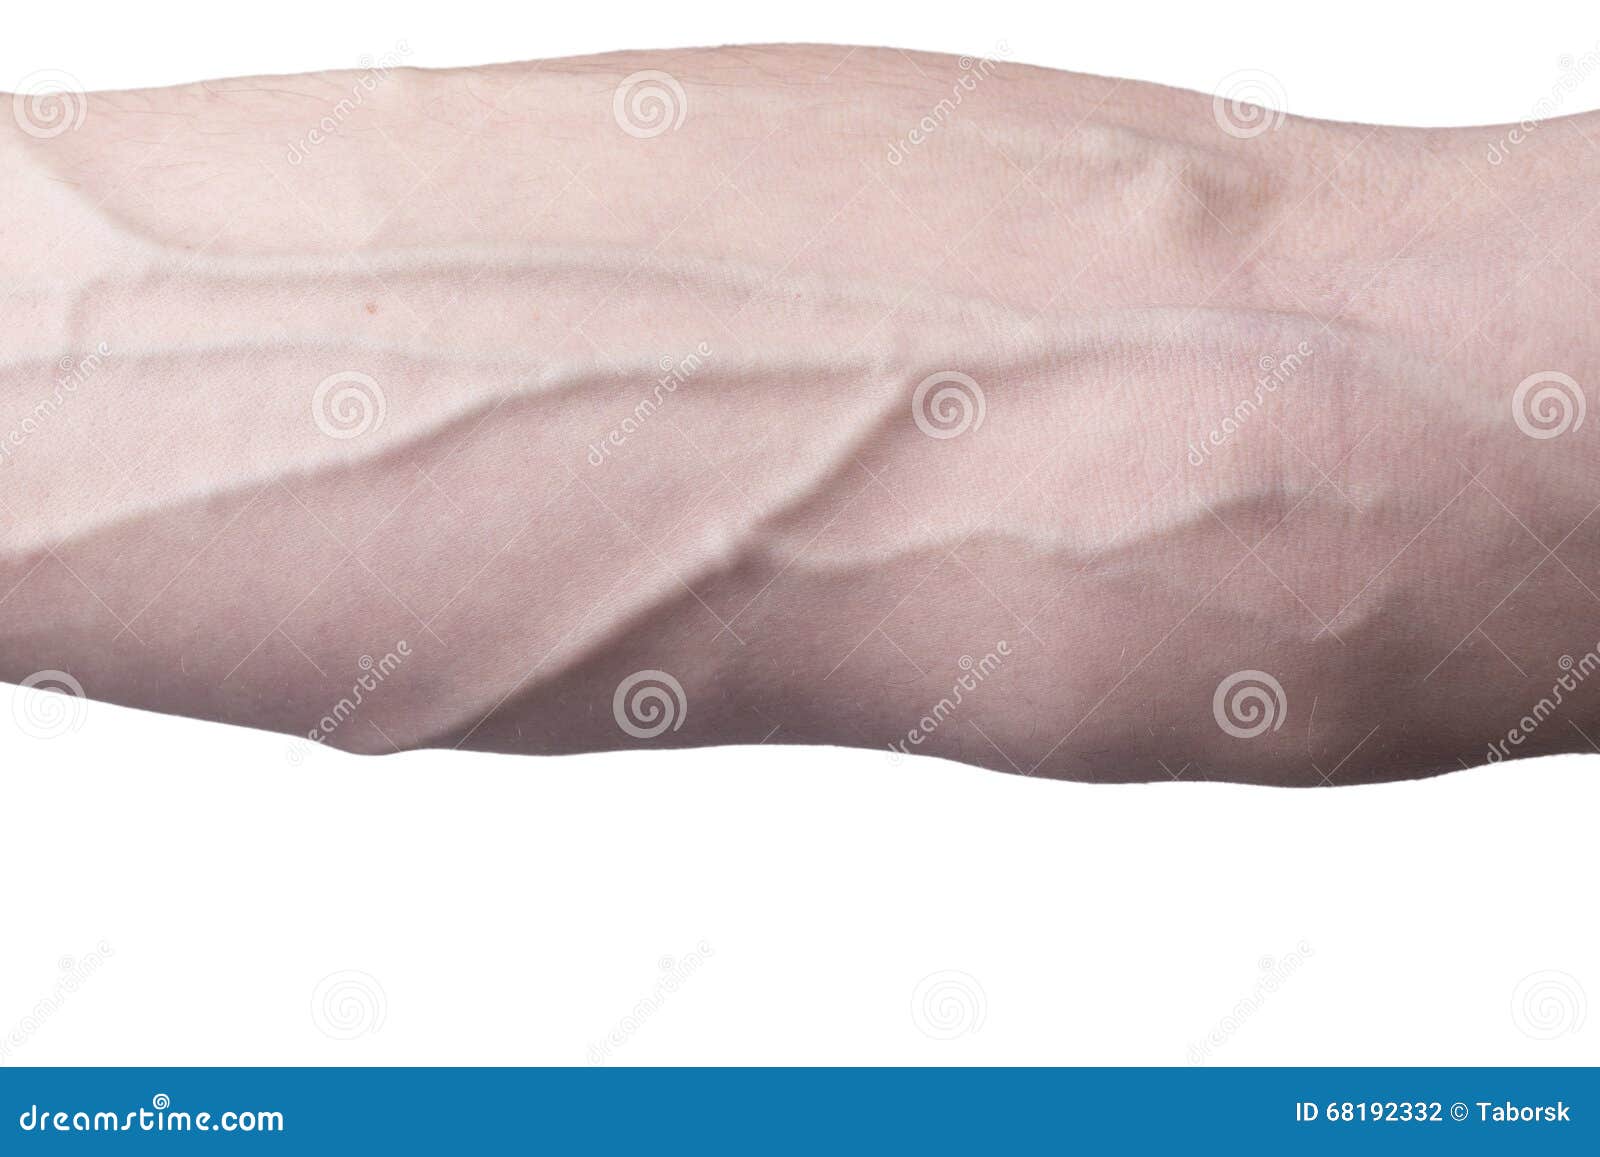 Male arm with visible veins.